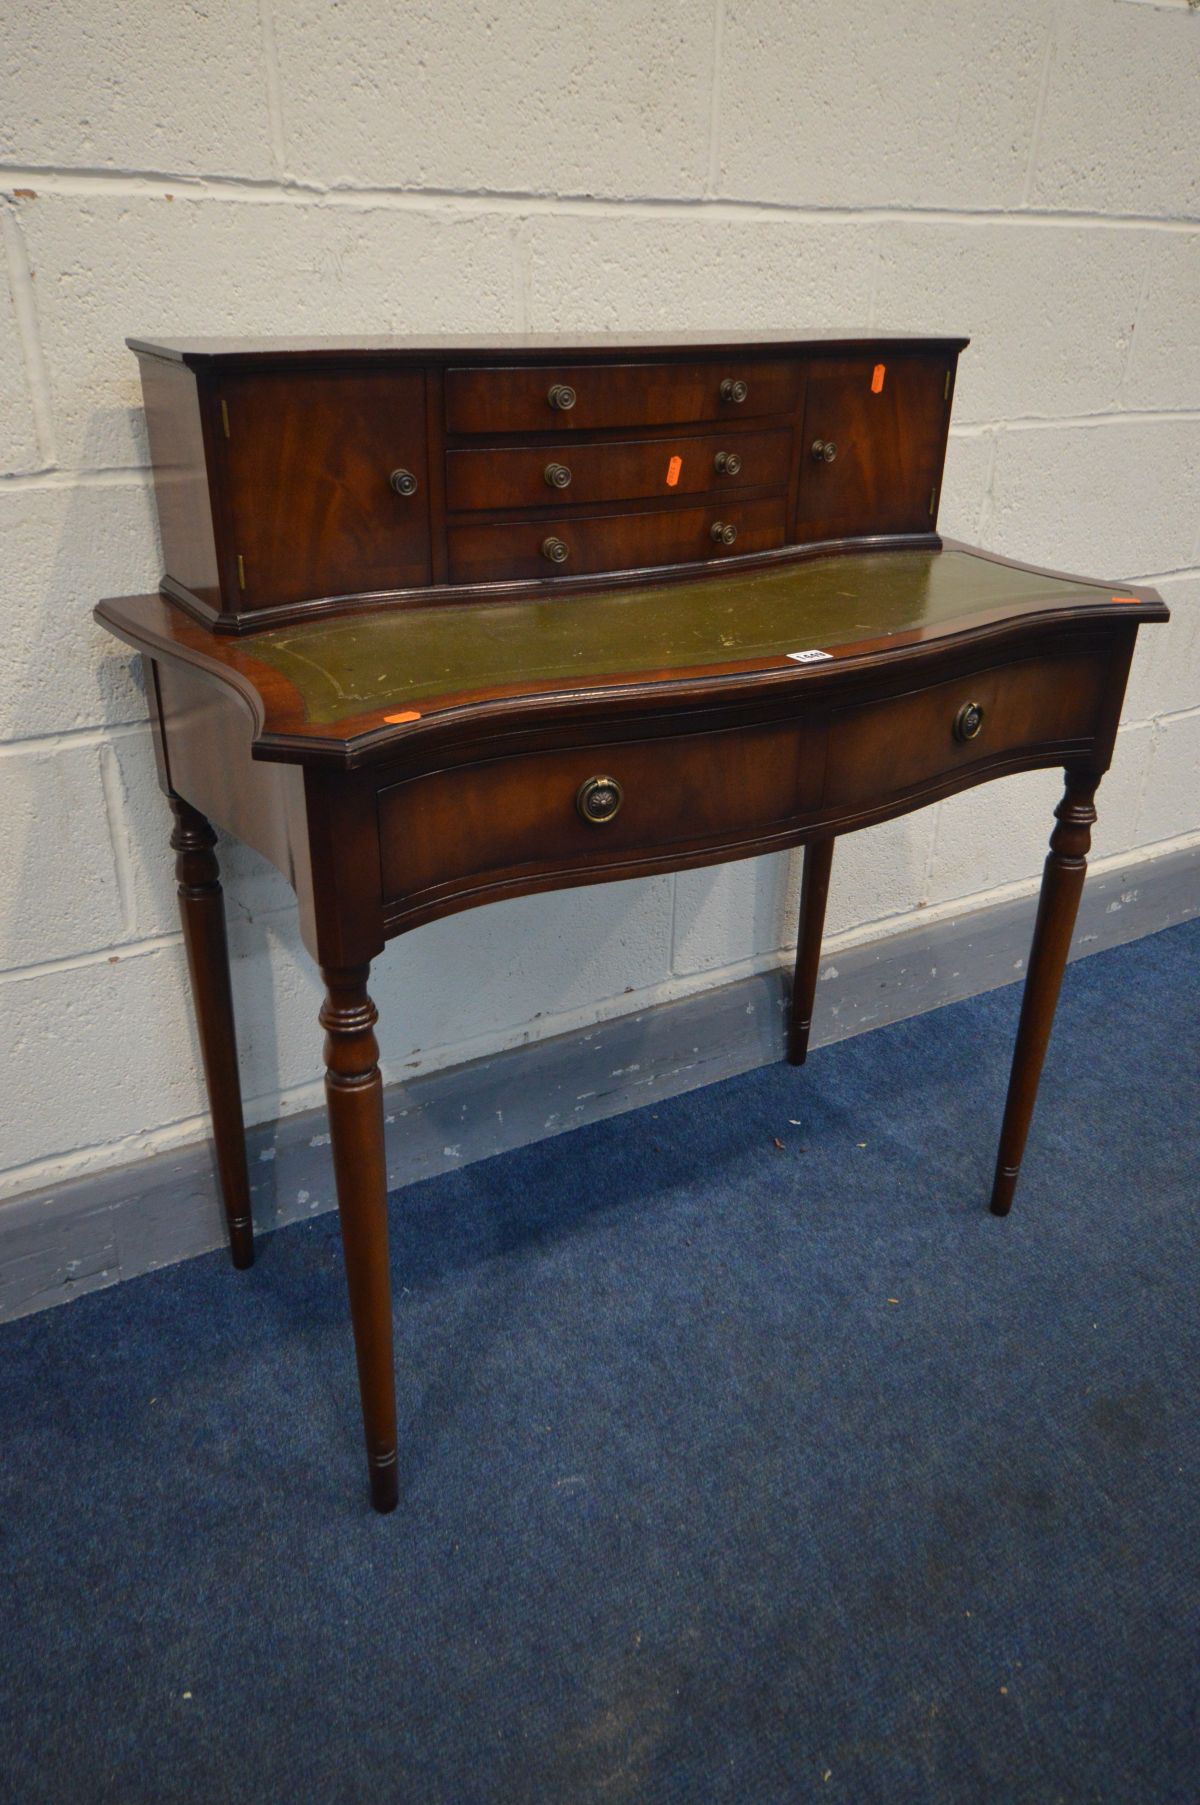 A REPRODUCTION MAHOGANY BONHEUR DU JOUR, with an arrangement of drawers, on turned legs, width